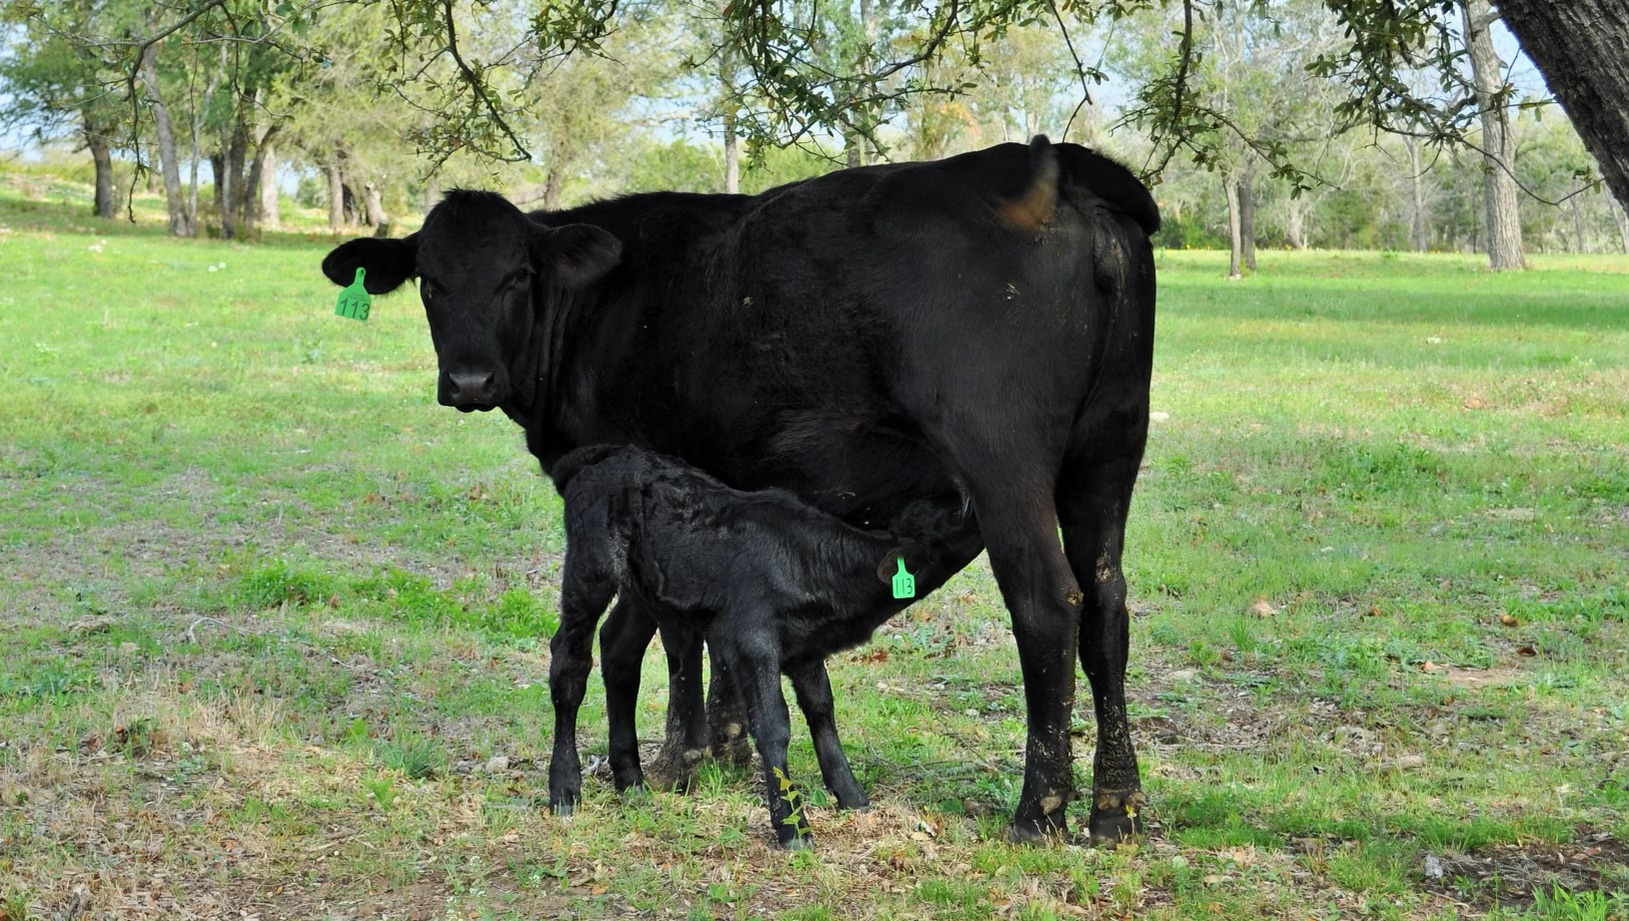 14 first calf pairs with small calves at their sides, #0322